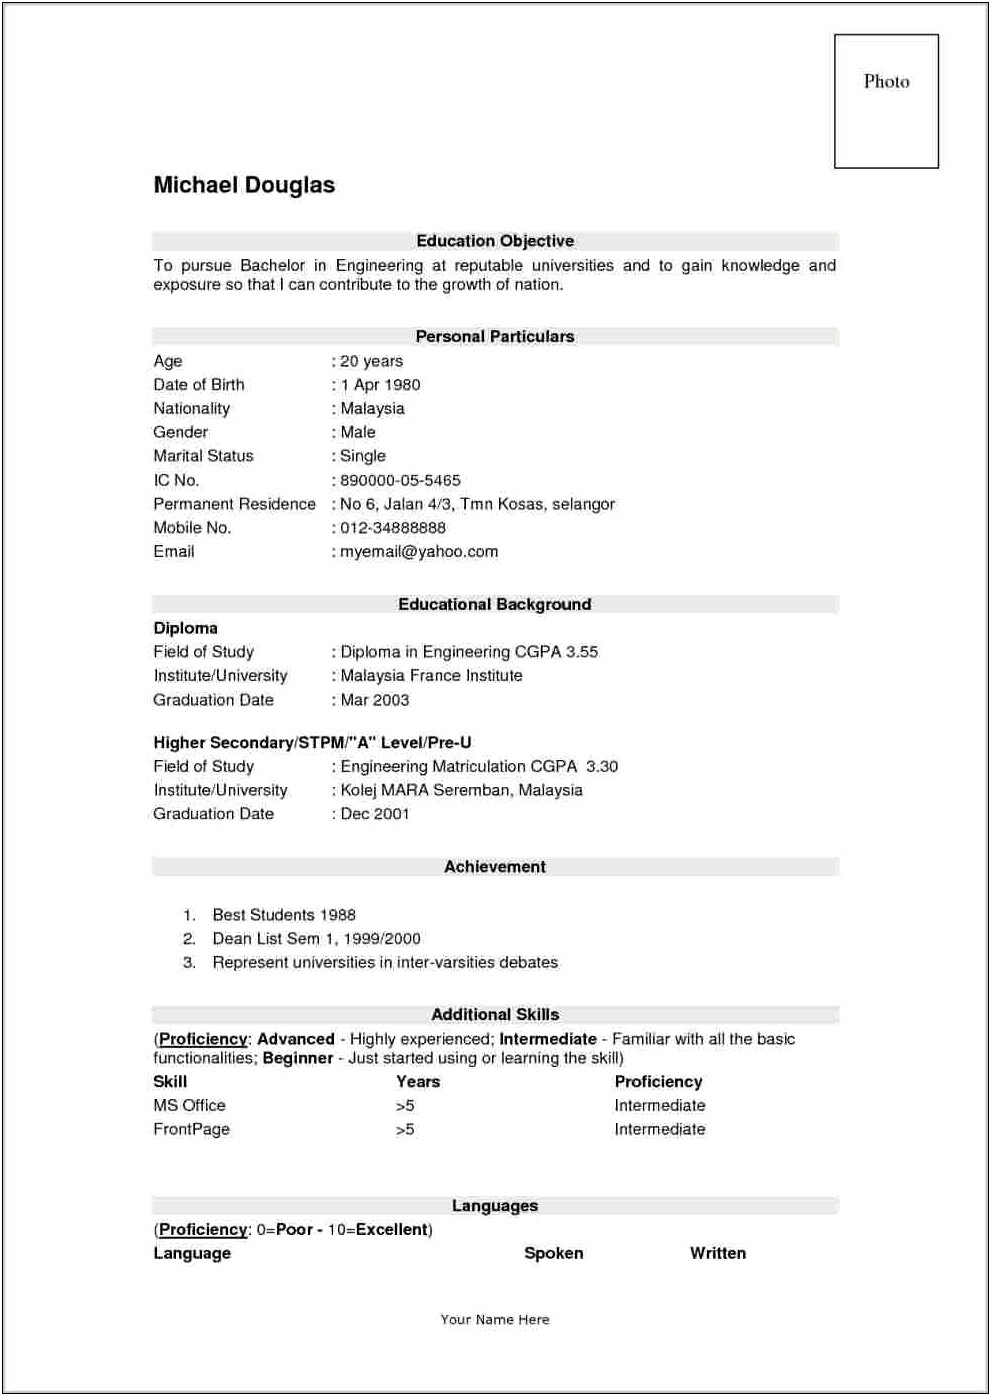 Resume Example For Students Singapore